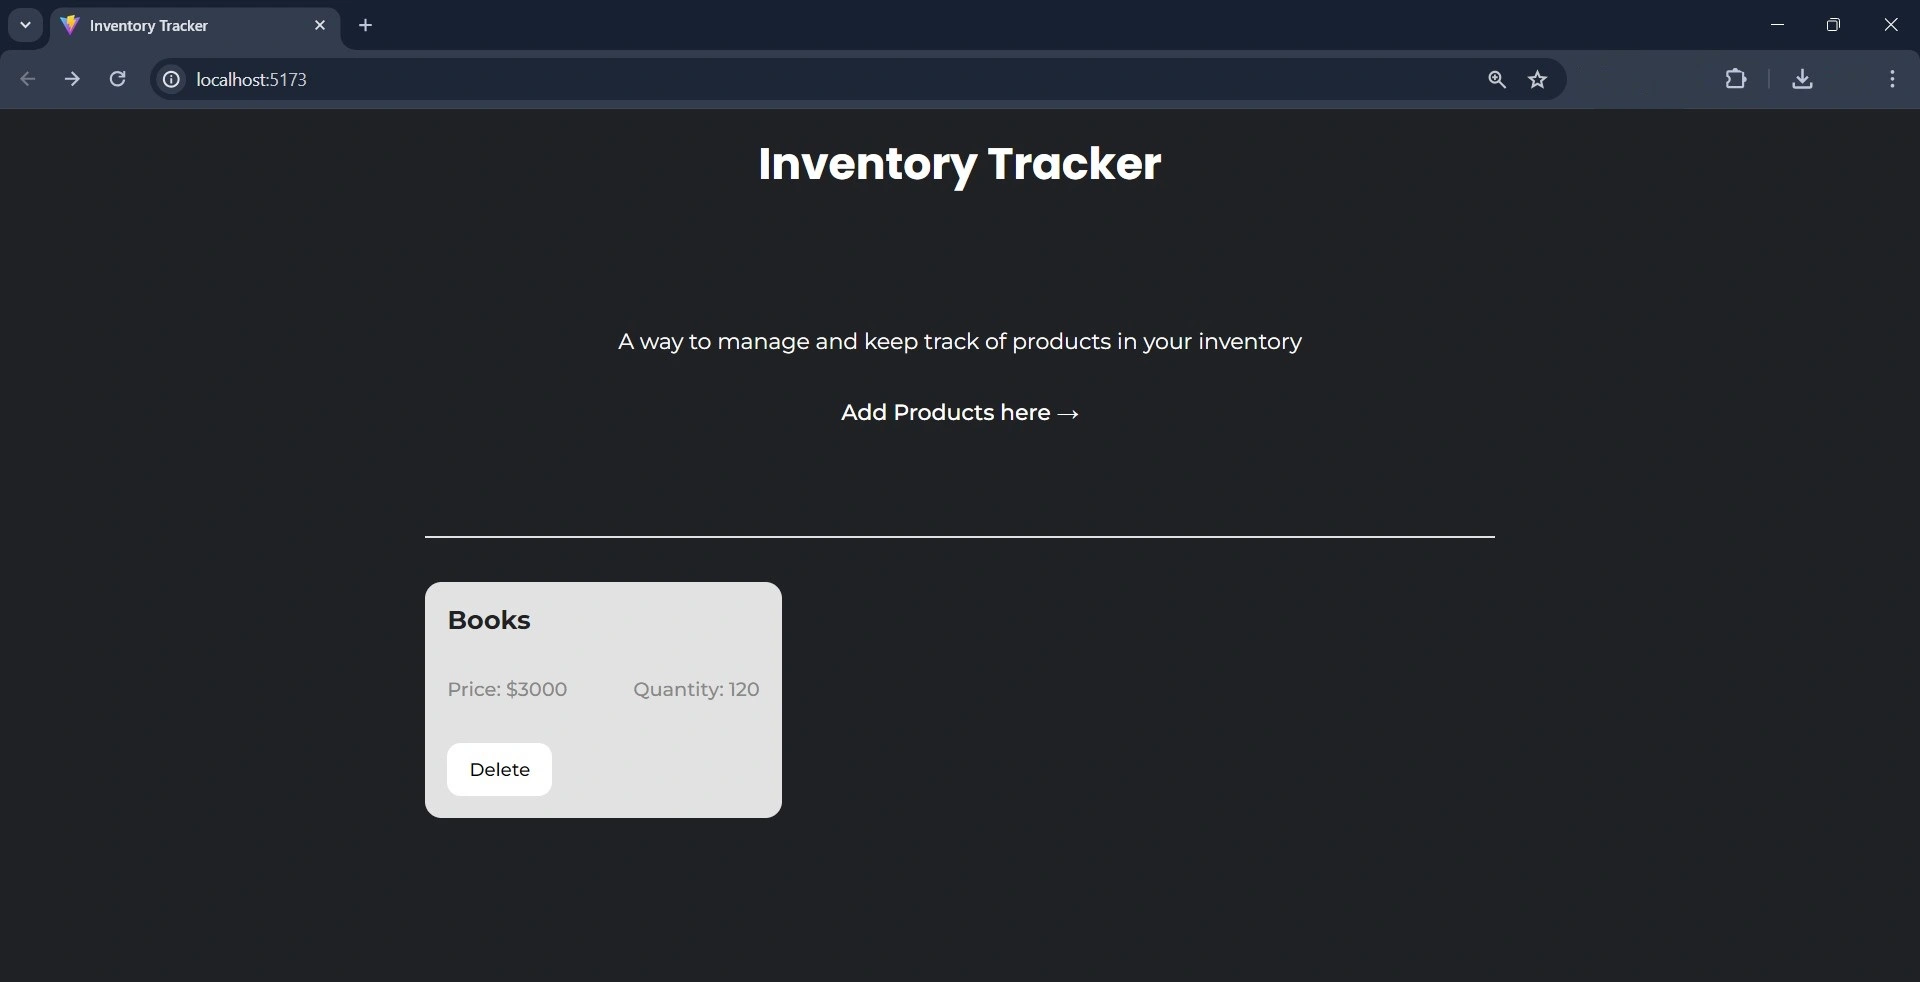 Inventory Tracker Home Page with Items